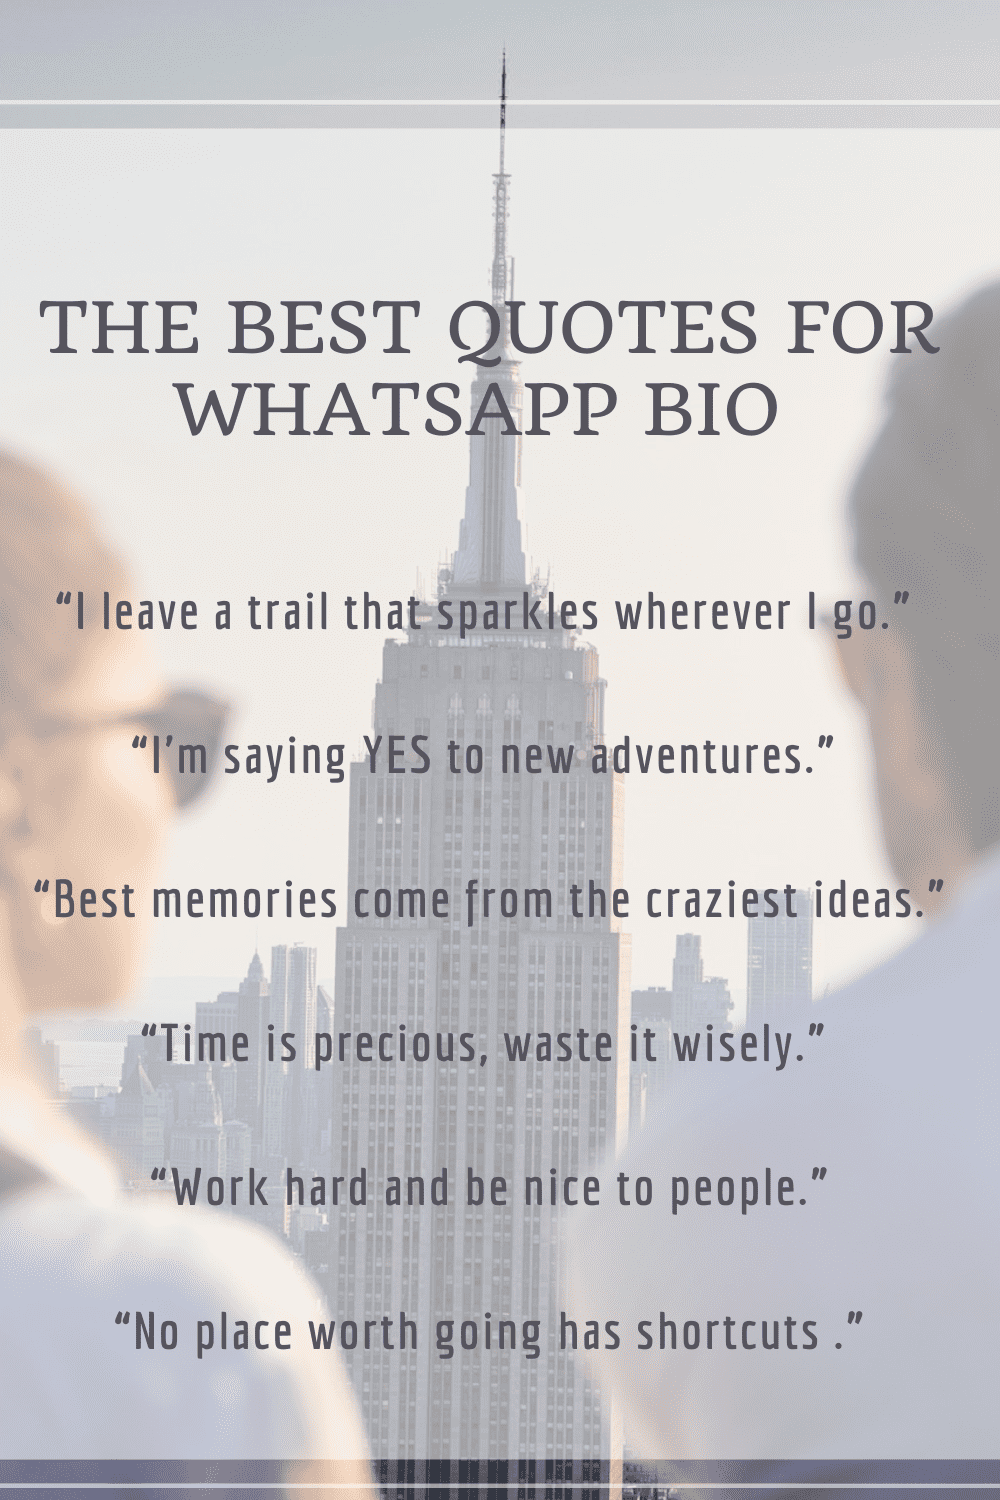 The Best Quotes for WhatsApp Bio